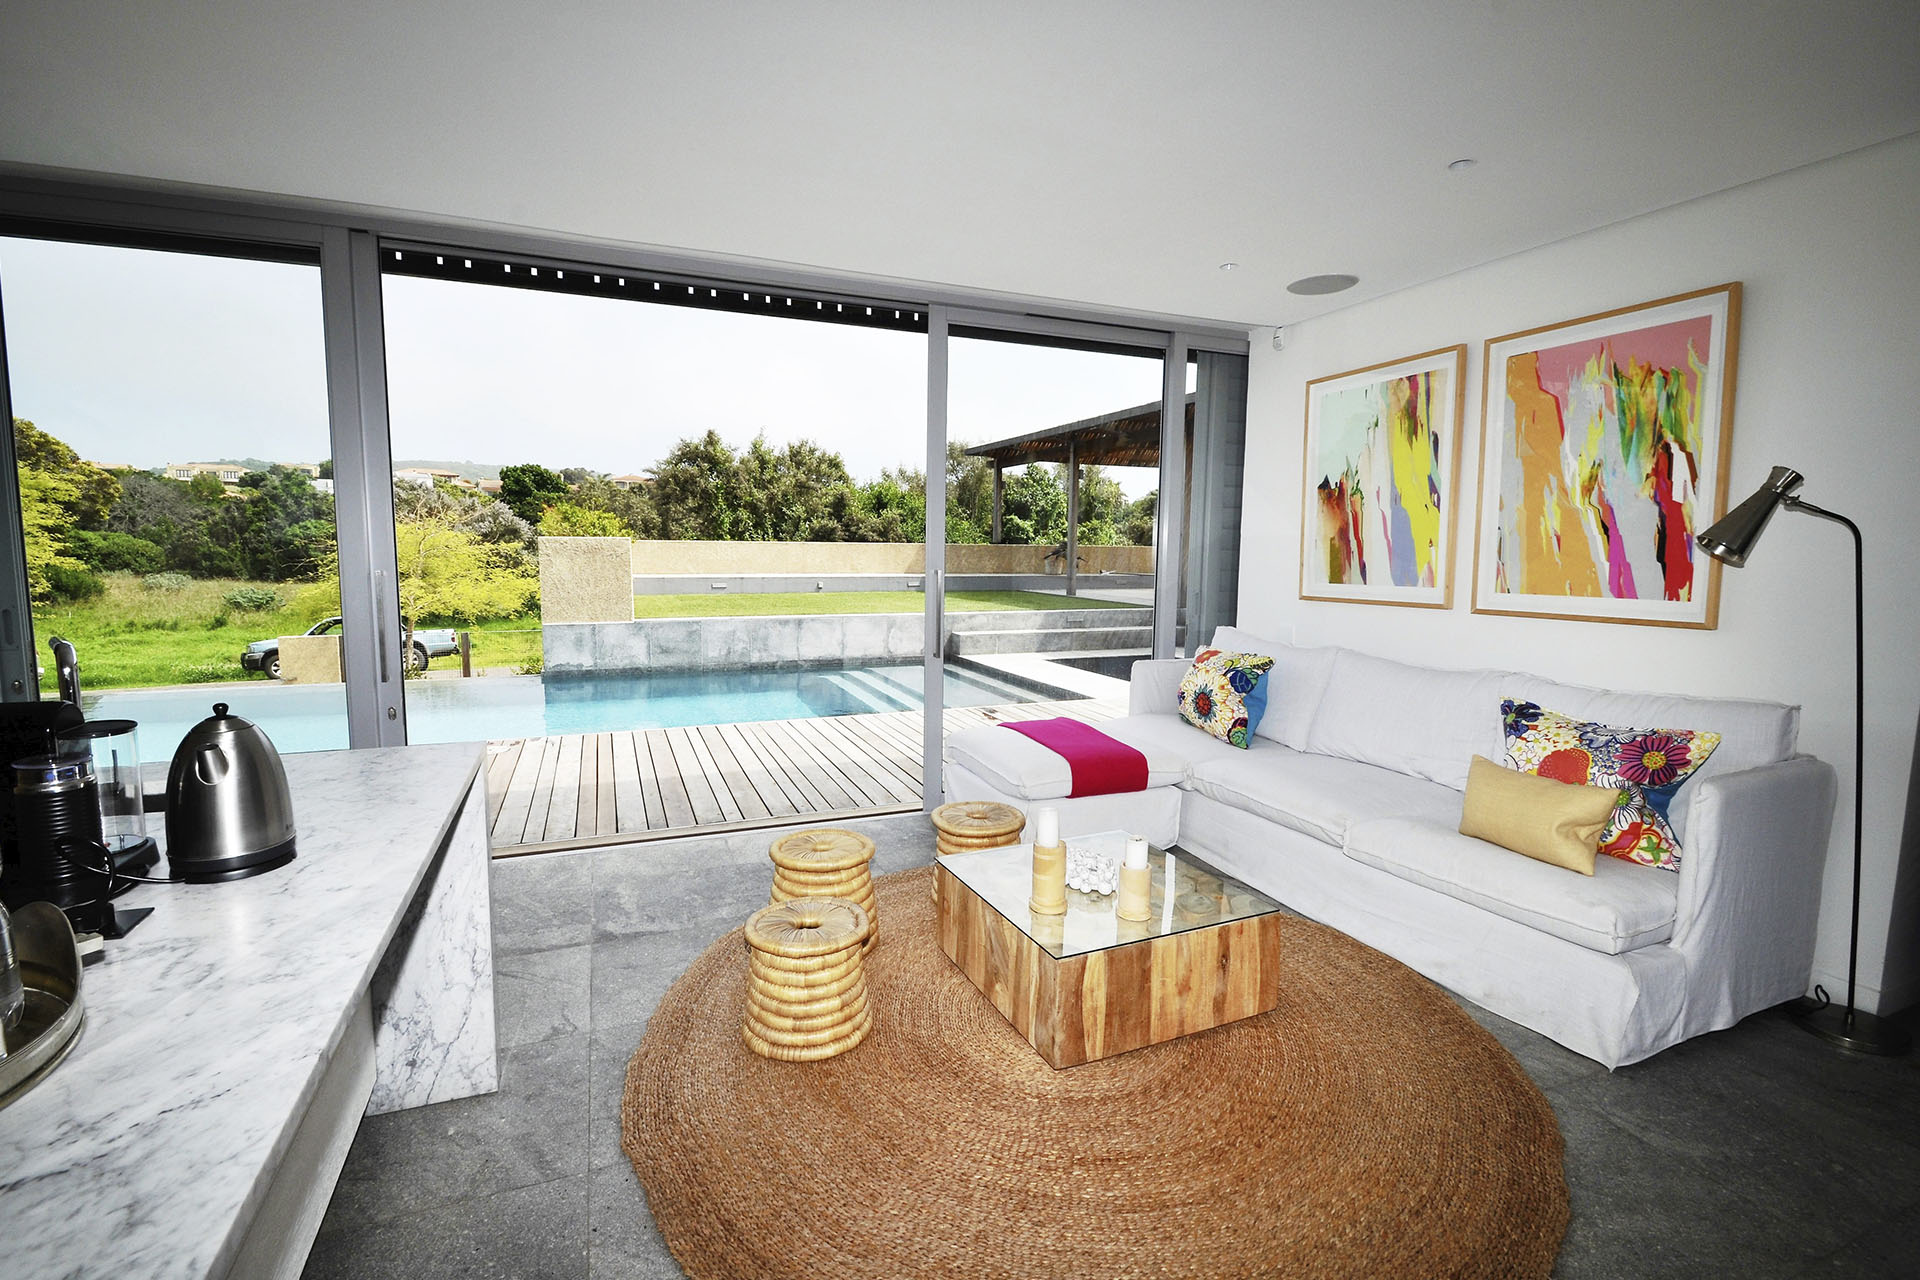 Photo 12 of The Dune House accommodation in Plettenberg Bay, Cape Town with 6 bedrooms and 7 bathrooms